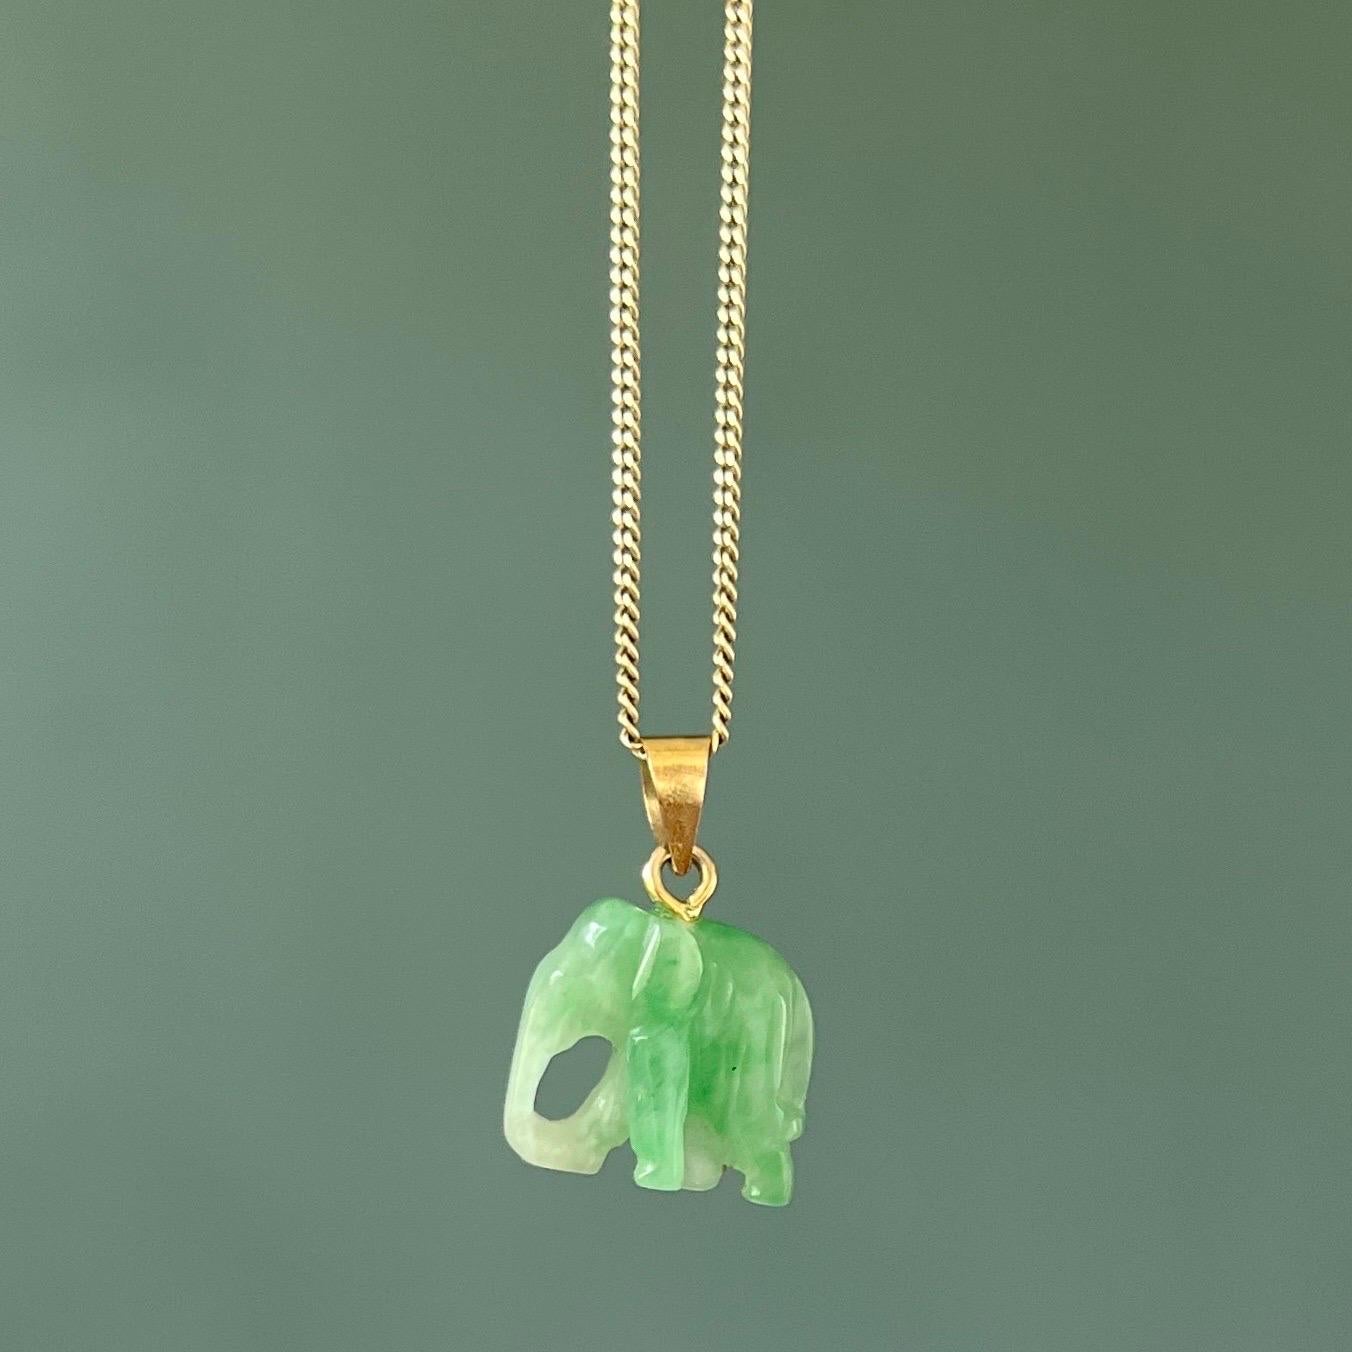 A gorgeous jade pendant carved into a sweet little elephant. This natural translucent green jade is set with a 14 karat gold bail. The jade is carved into this lovely elephant which has a walking posture. Elephants are symbols of luck and